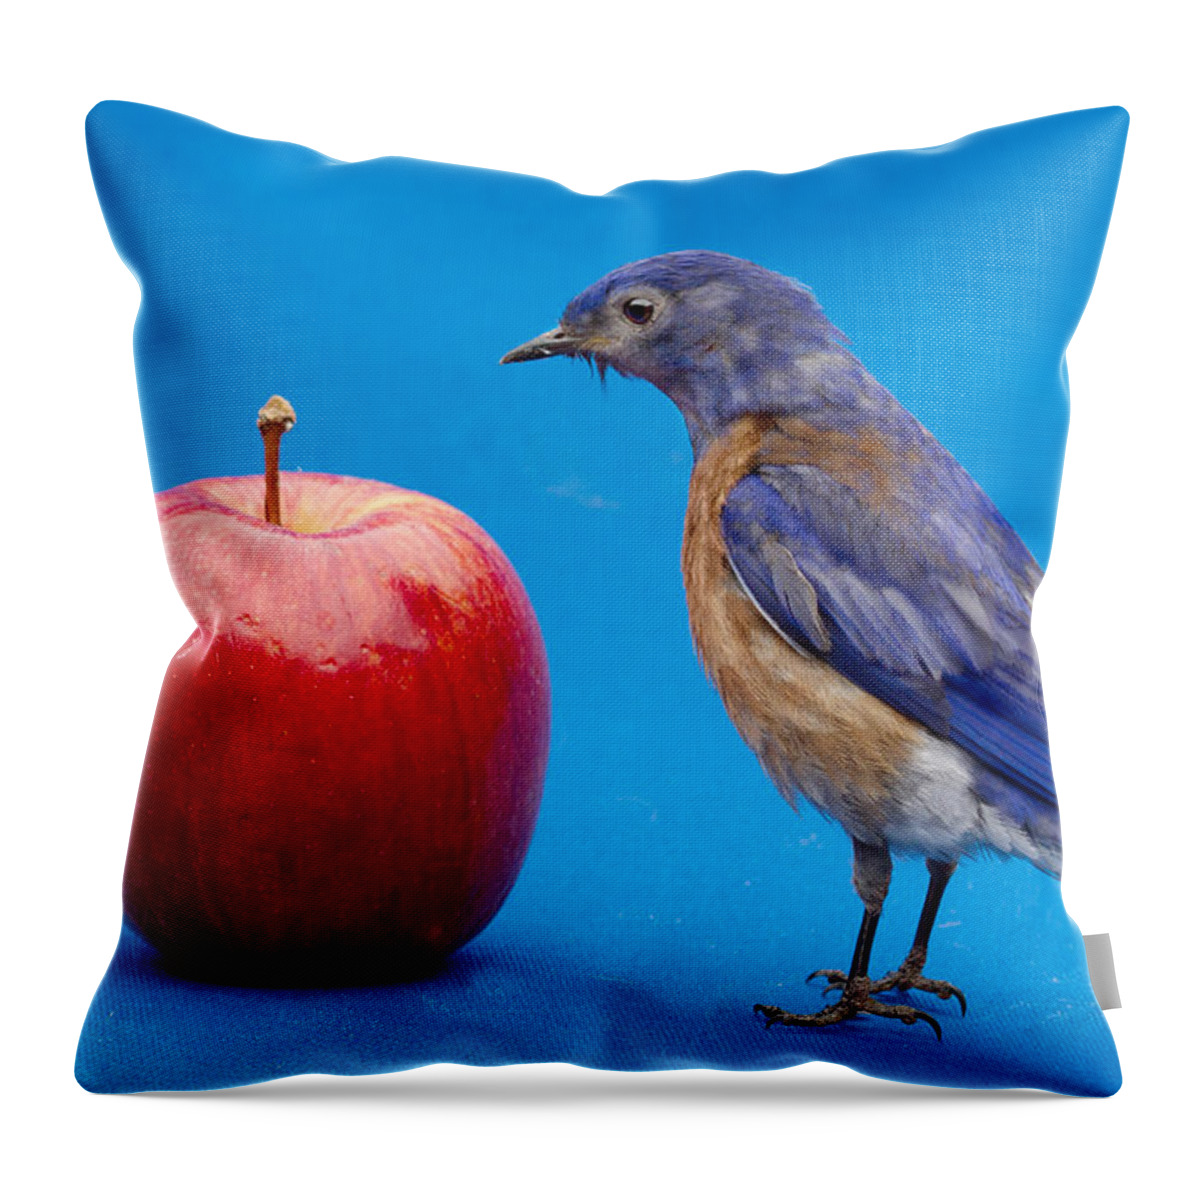  Humor Throw Pillow featuring the photograph I would rather see the doctor by Jean Noren